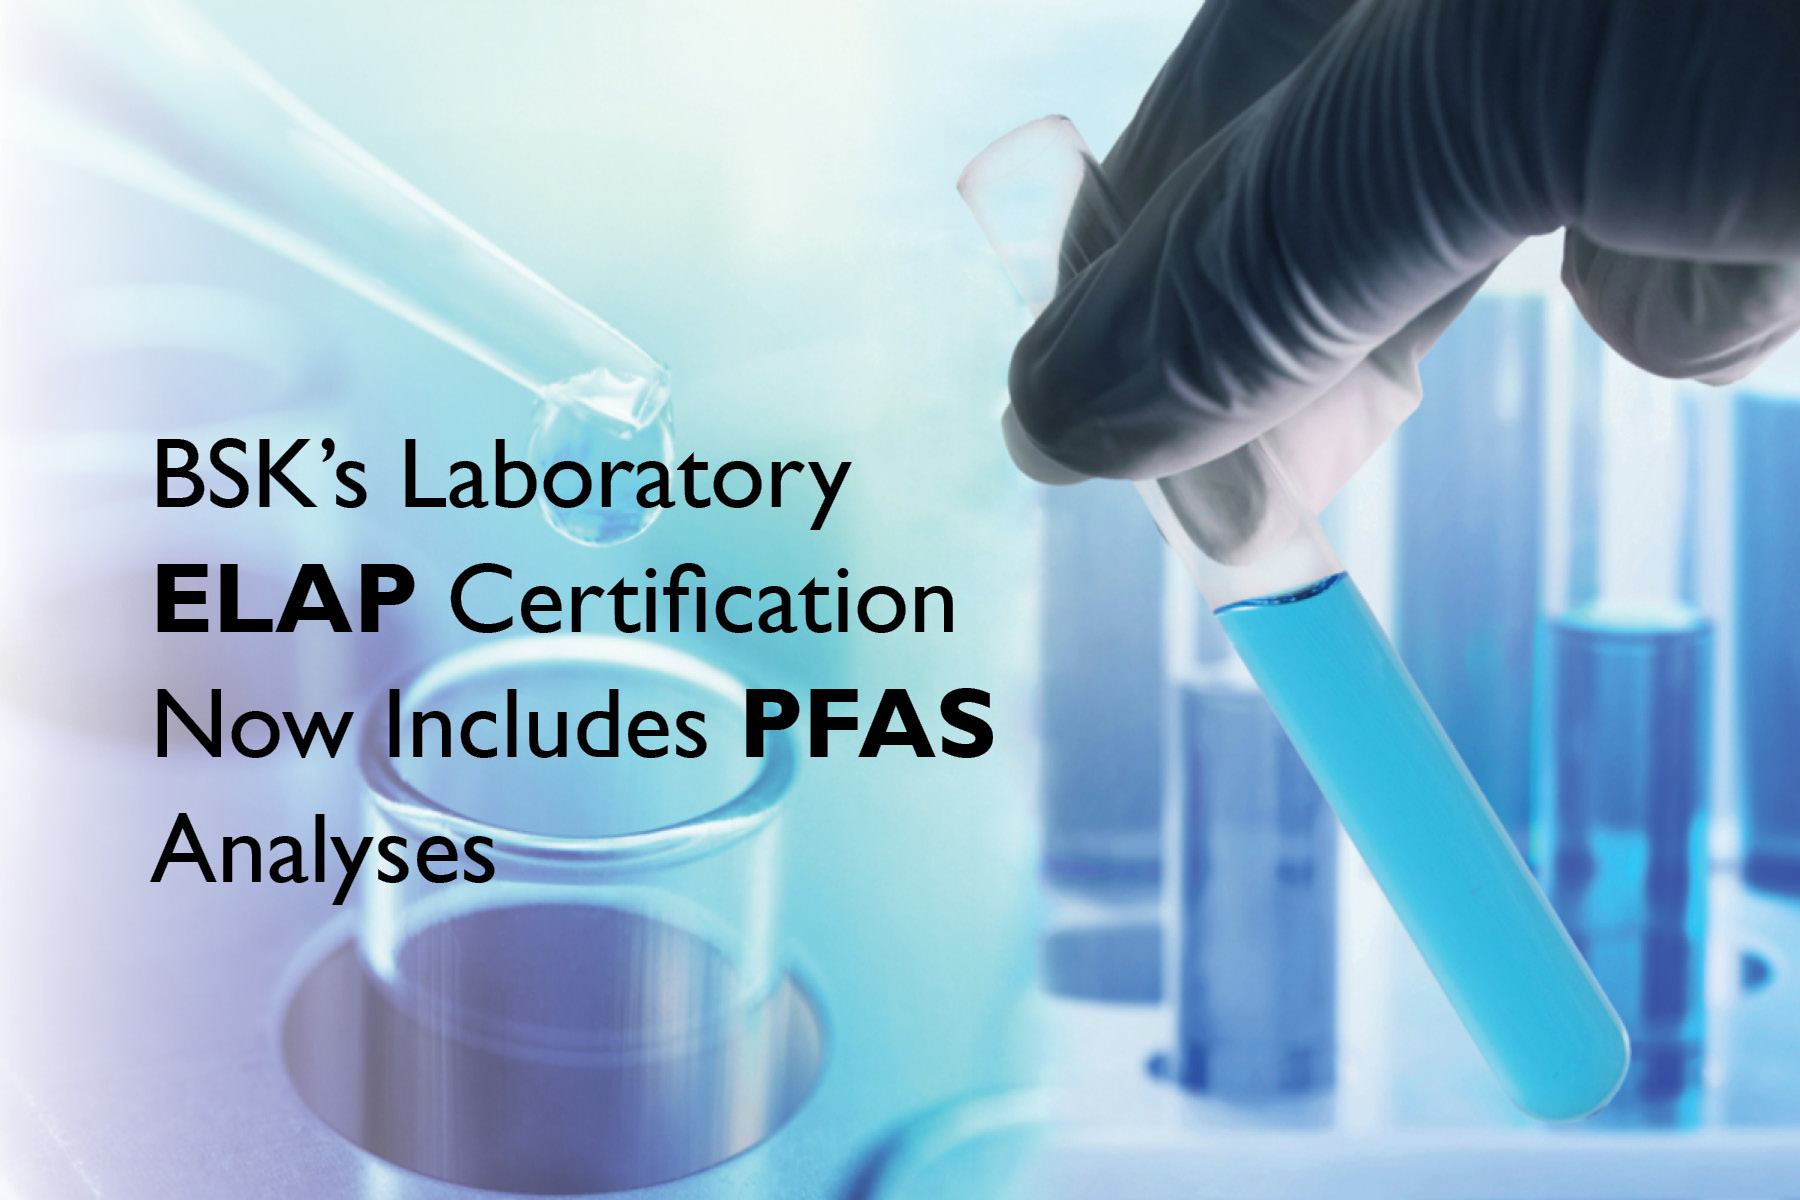 BSK Associates is certified for PFAS analyses by EPA Method 537.1